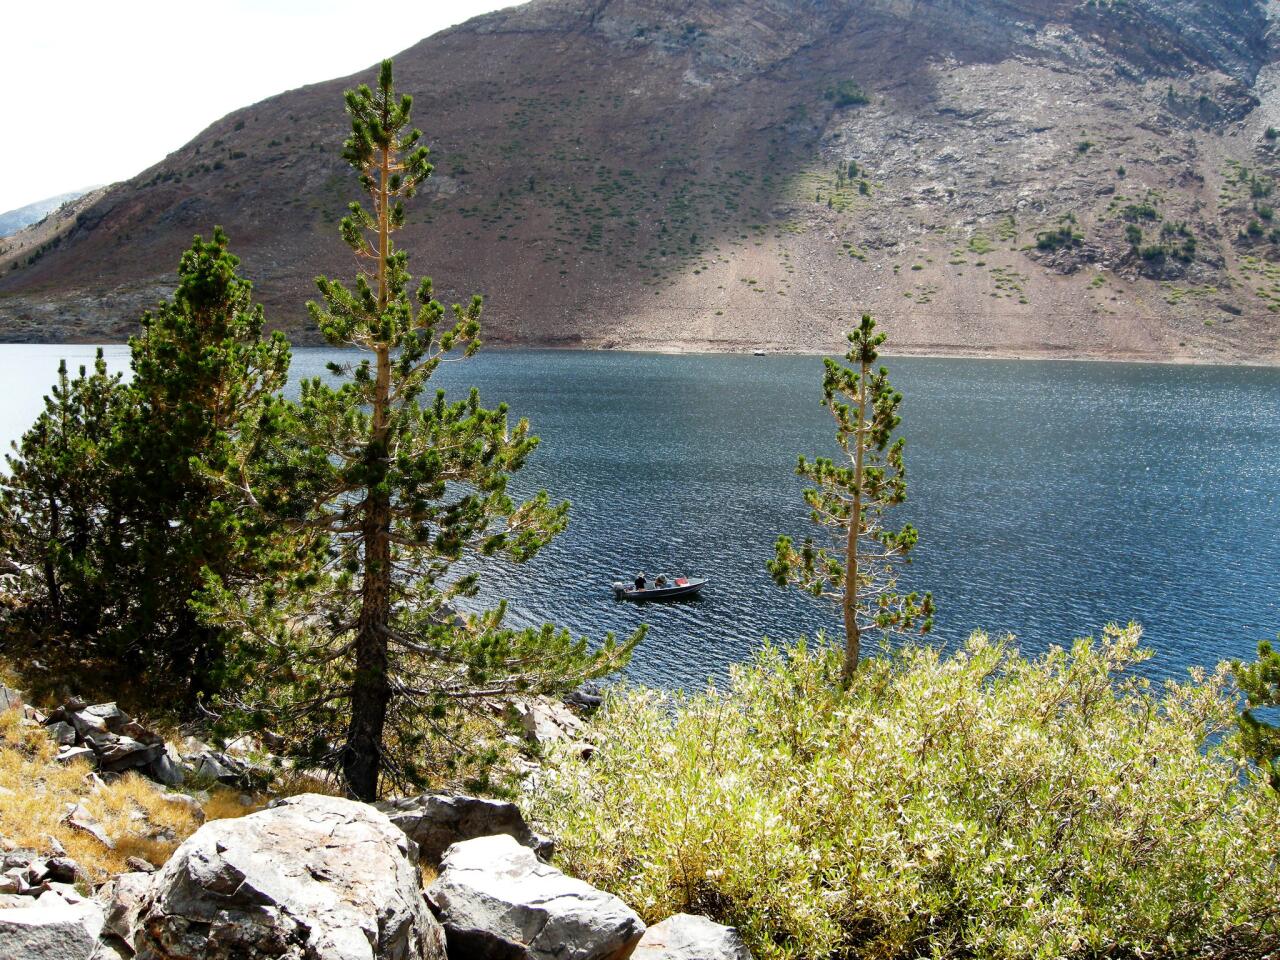 Anglers try their luck on Saddlebag Lake, west of Lee Vining, a California hamlet that's also a prime spot for fishing.